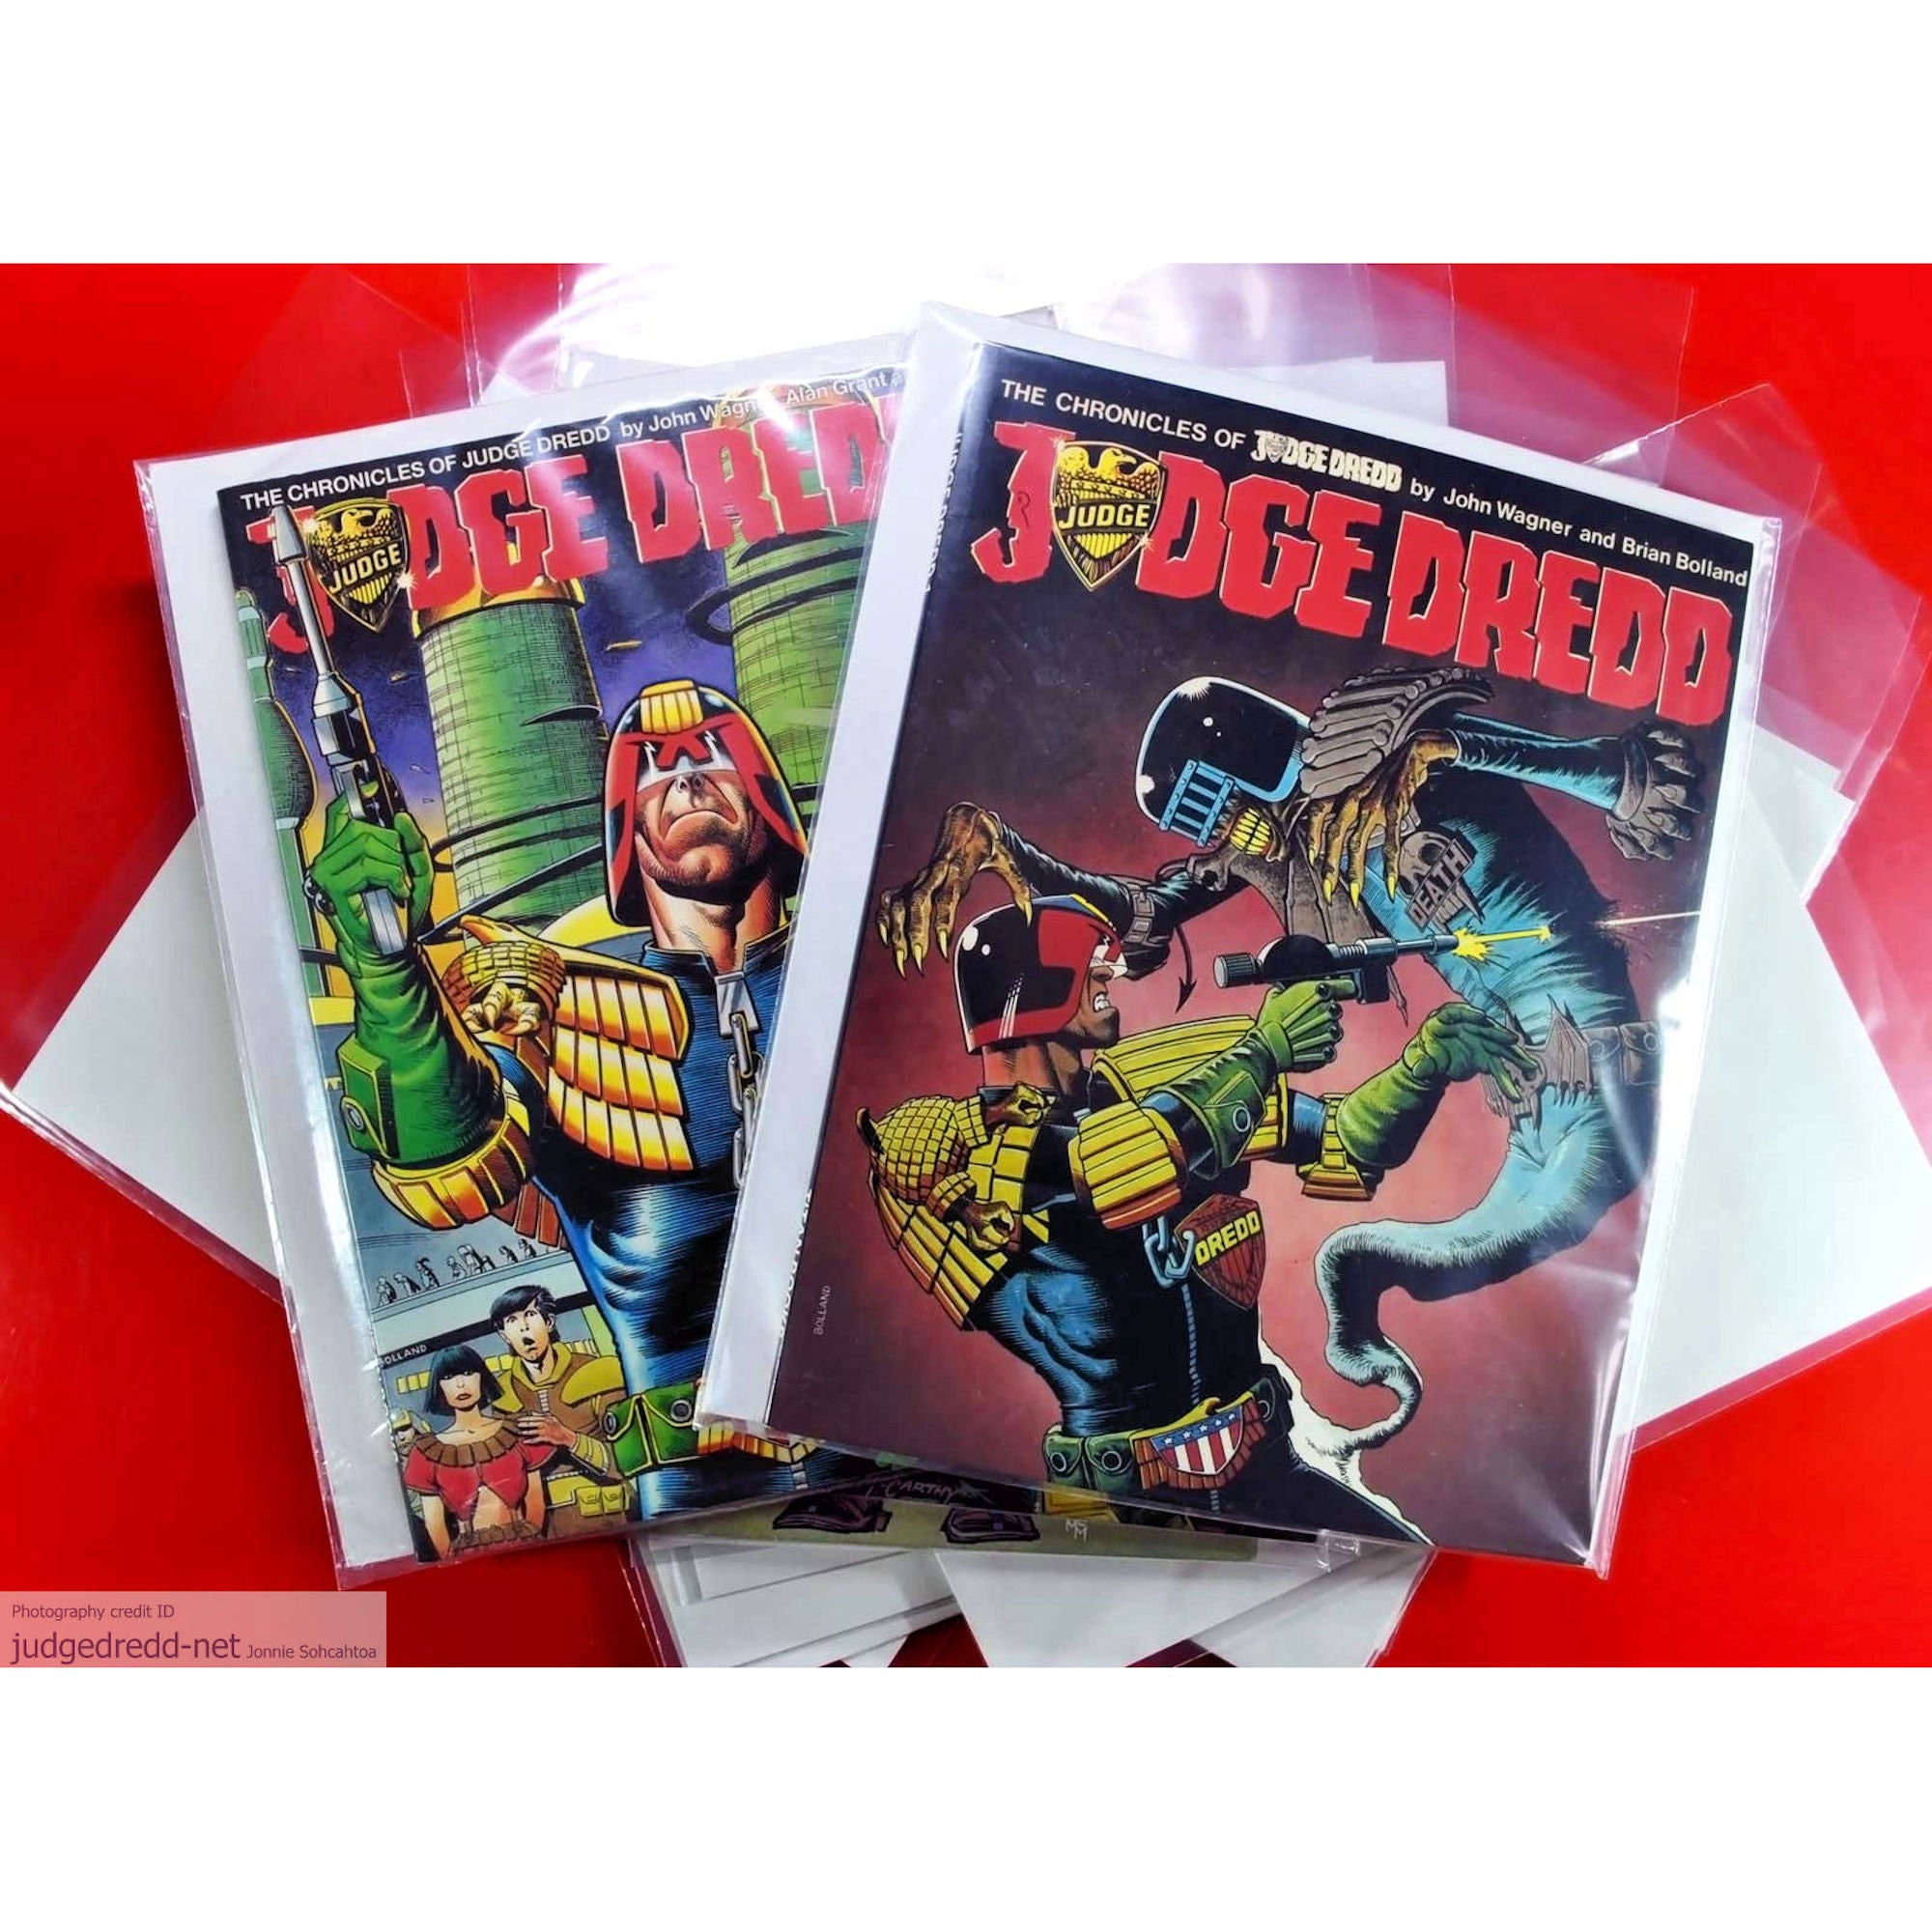 Has anybody tried DNJ Comic bags/boards from ? If so, how